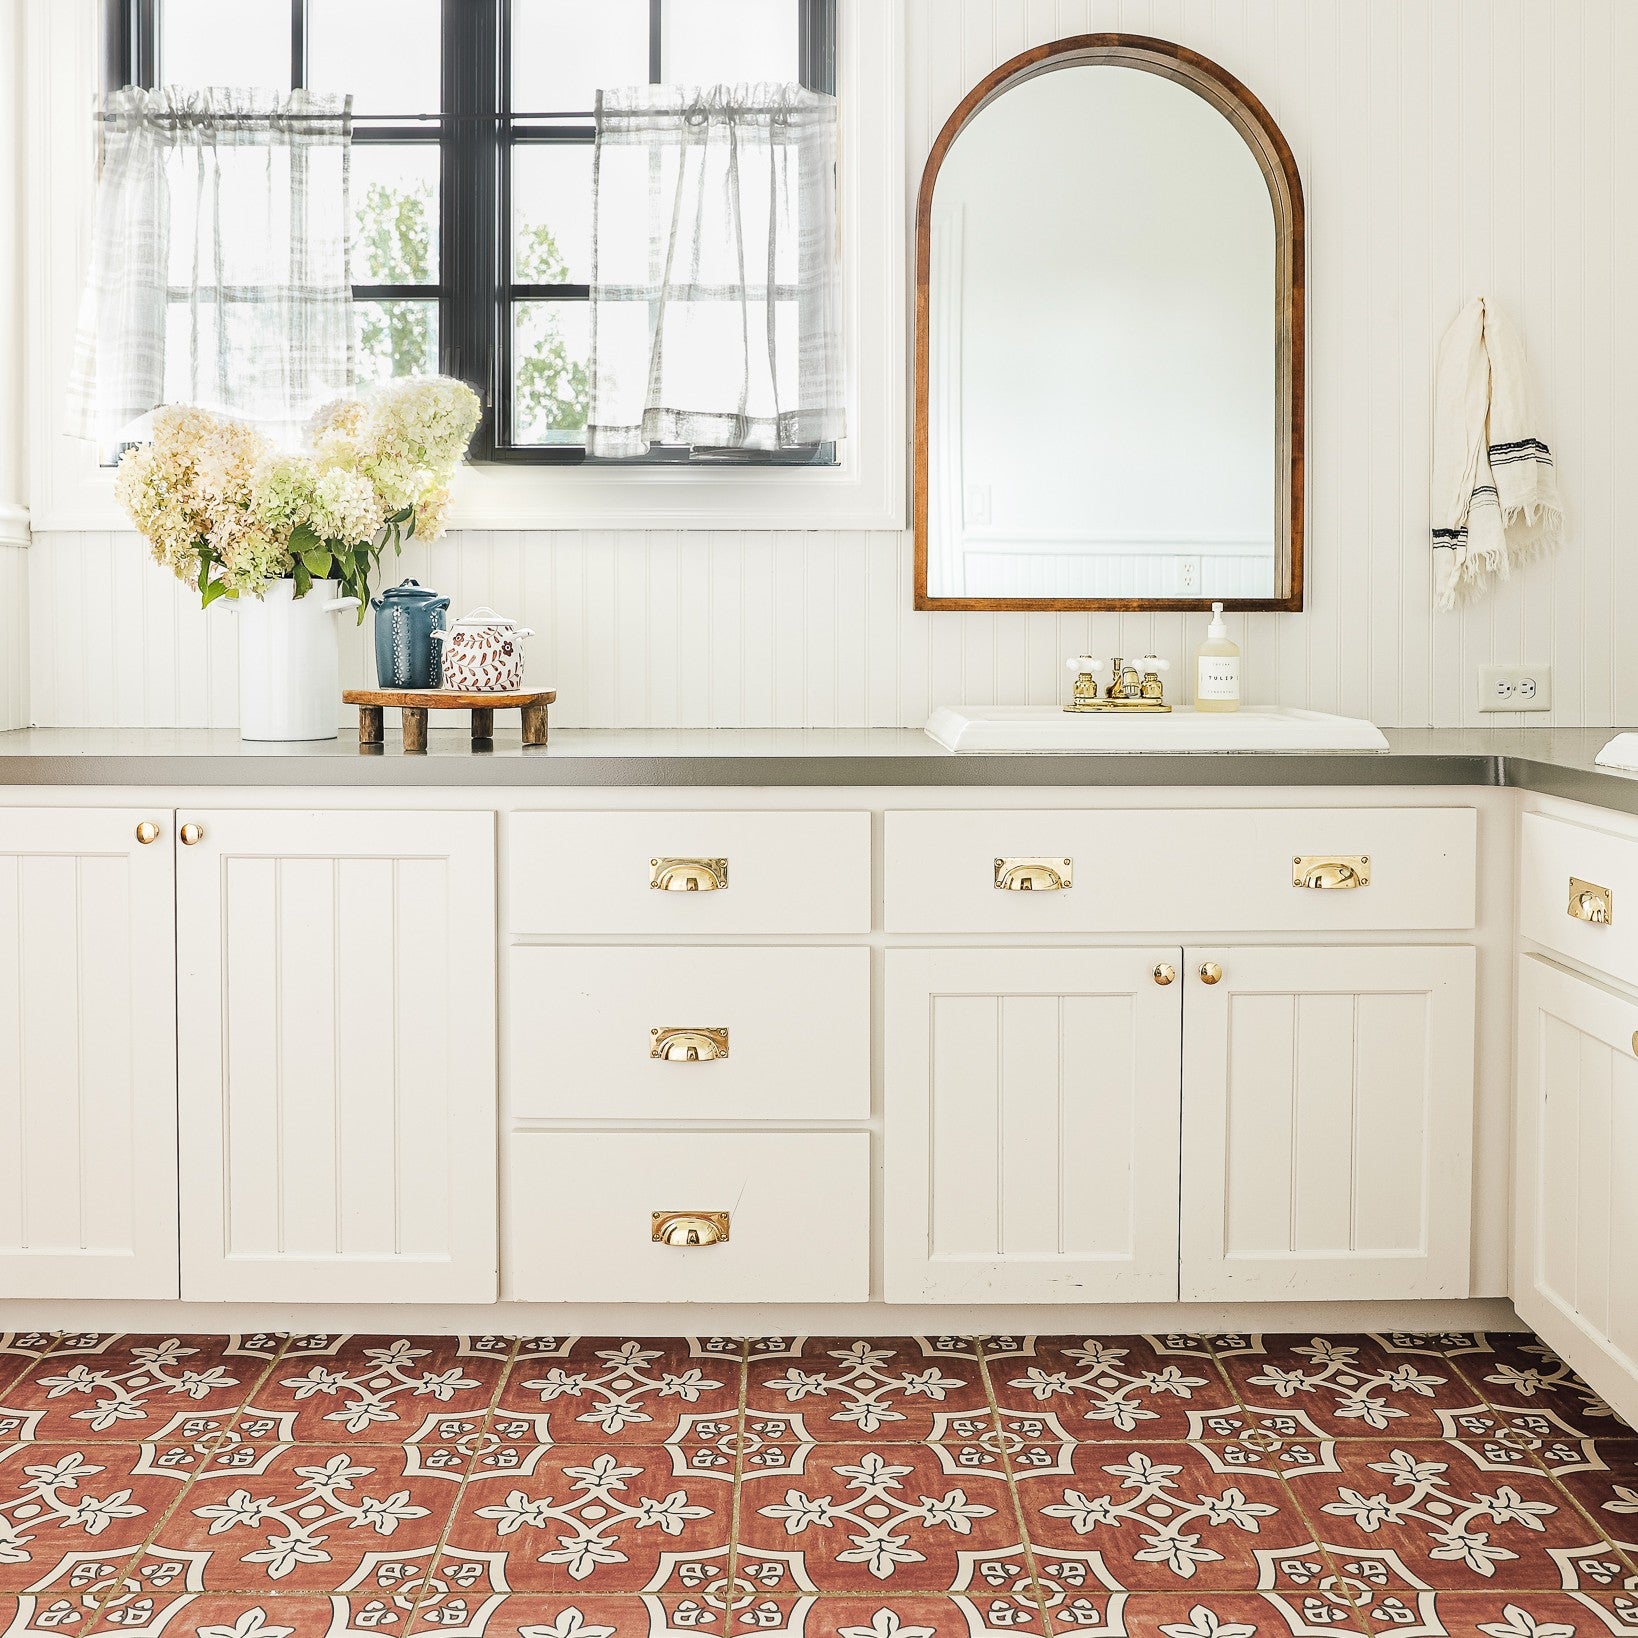 Palma Tile Stickers Brighten Up A Bland Bathroom